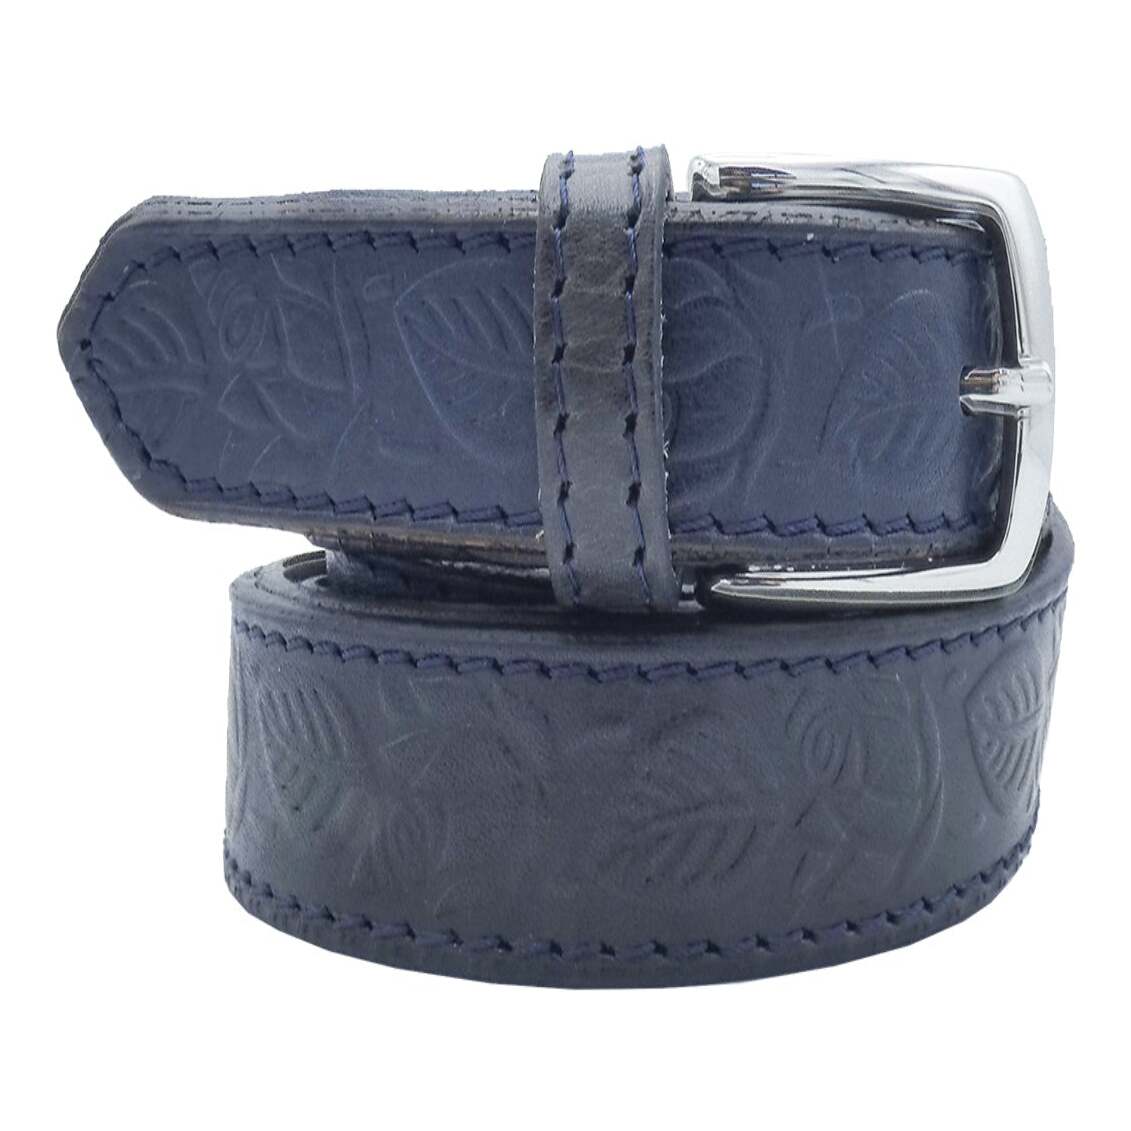 Monet belt in hand-stamped leather with handcrafted satin zamak buckle